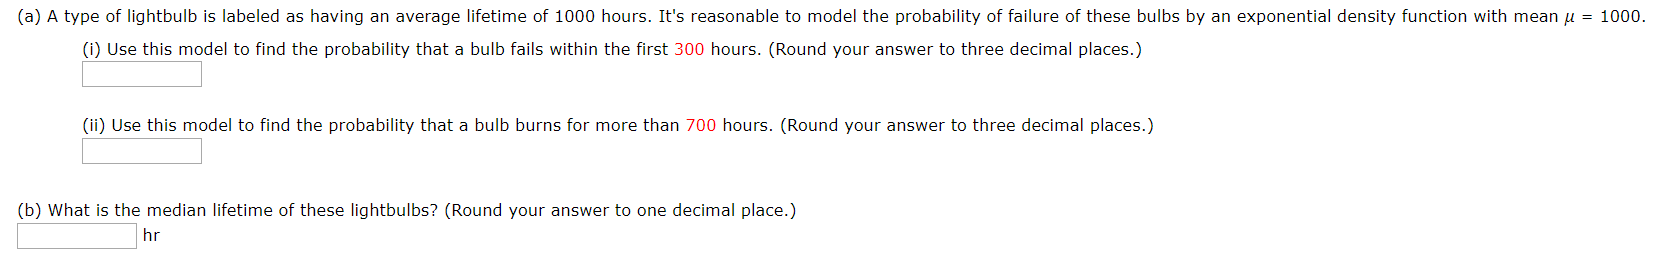 (a) A type of lightbulb is labeled as having an average lifetime of 1000 hours. It's reasonable to model the probability of failure of these bulbs by an exponential density function with mean u 1000
(i) Use this model to find the probability that a bulb fails within the first 300 hours. (Round your answer to three decimal places.)
(ii) Use this model to find the probability that a bulb burns for more than 700 hours. (Round your answer to three decimal places.)
(b) What is the median lifetime of these lightbulbs? (Round your answer to one decimal place.)
hr
